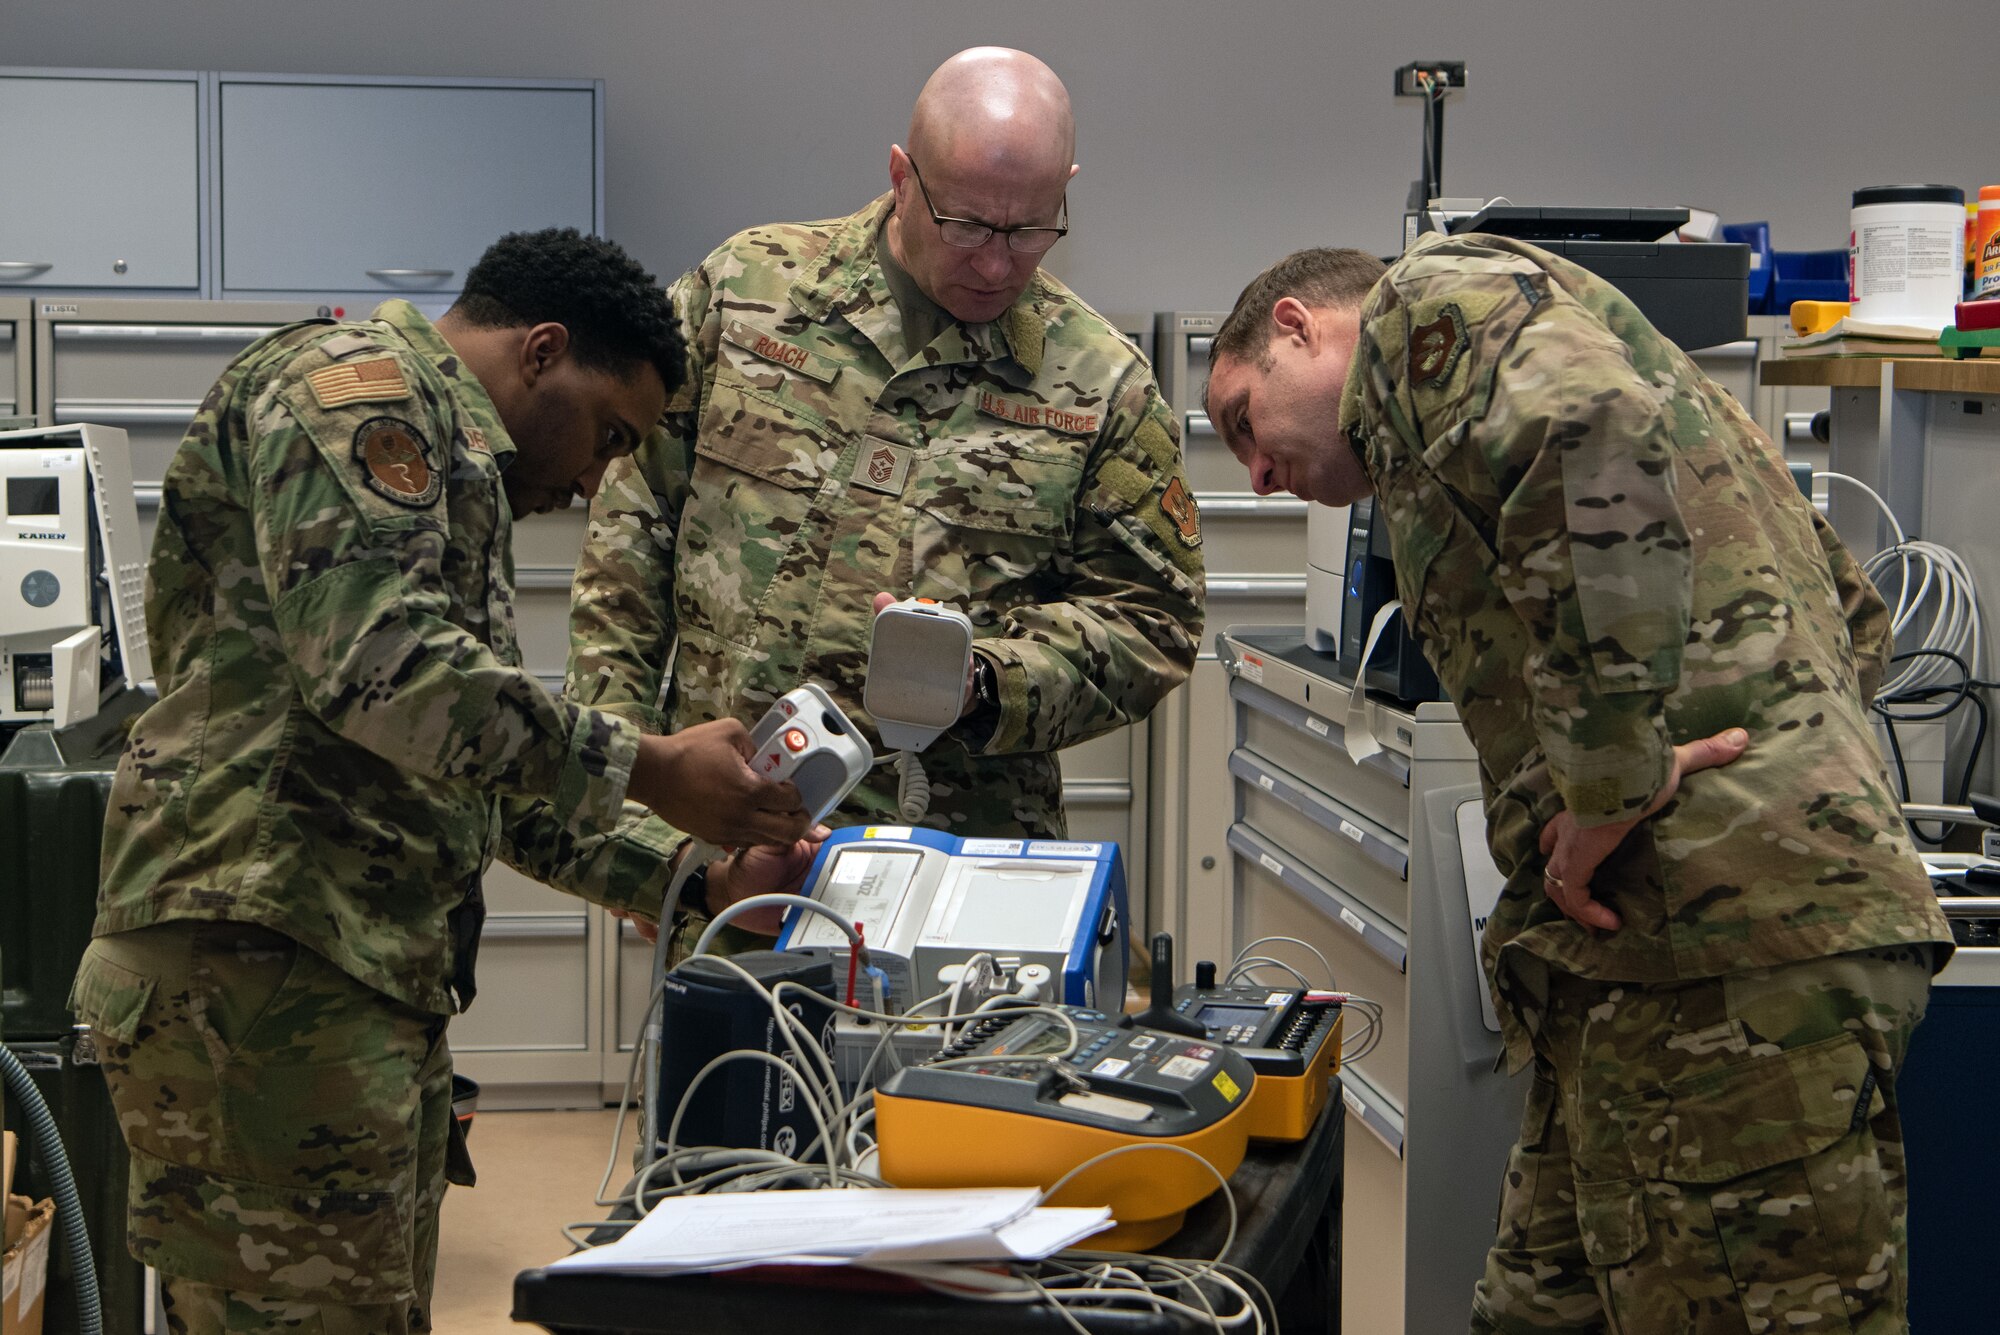 man powers on medical equipment with wing leadership